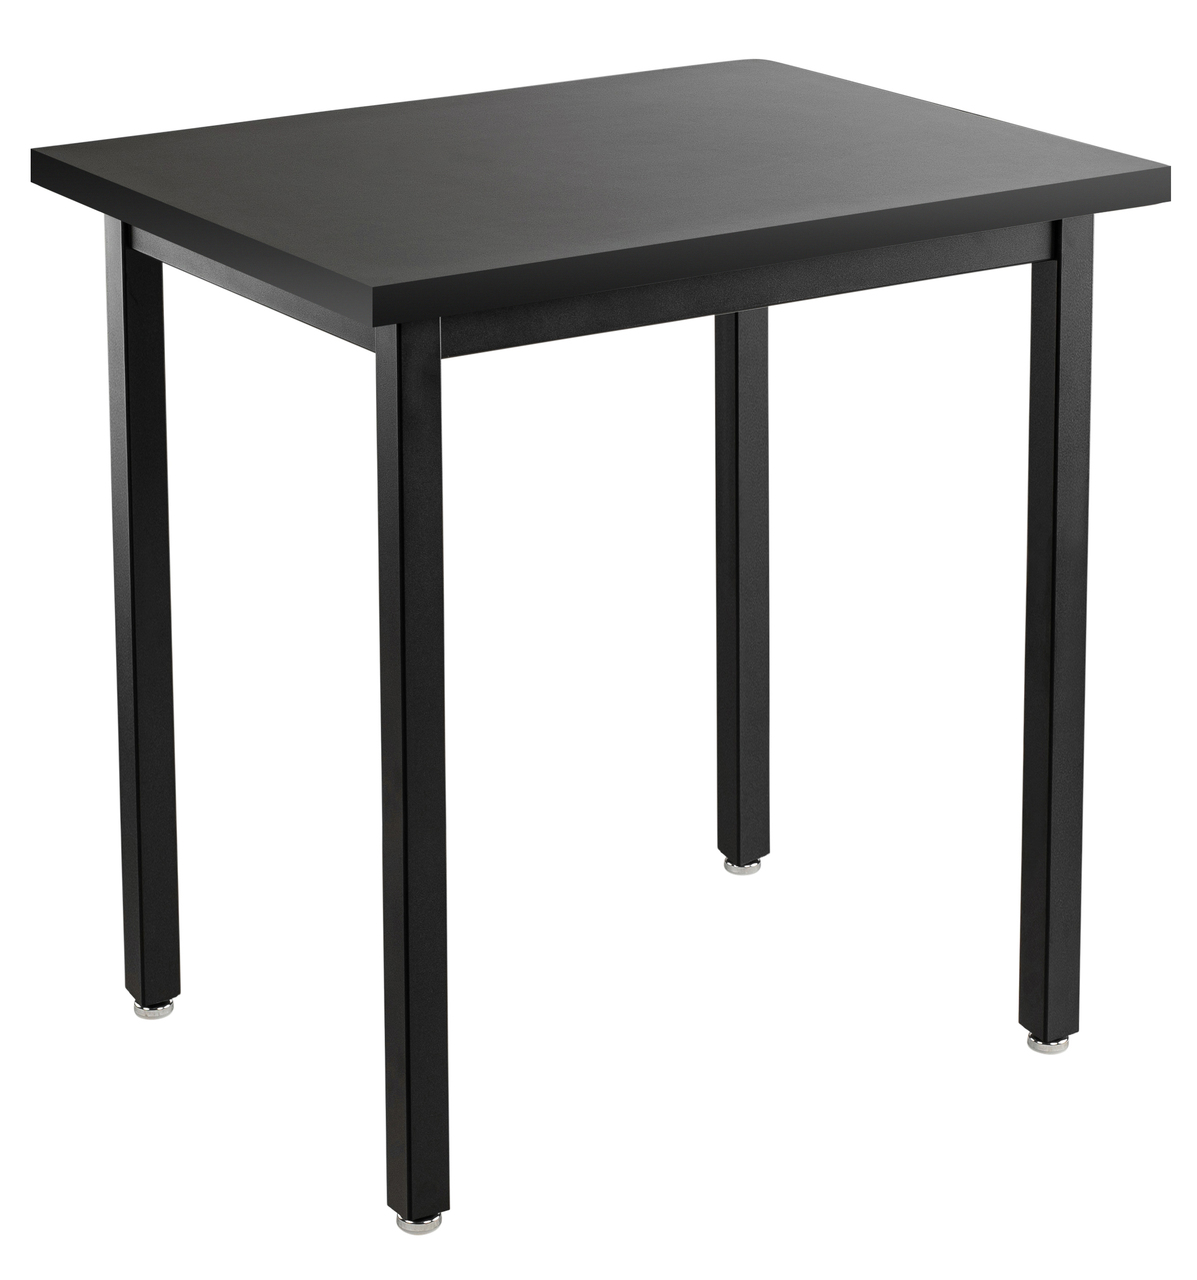 NPS Steel Science Lab Table -  24" x 24" -  Chemical Resistant Top - Black Surface Color